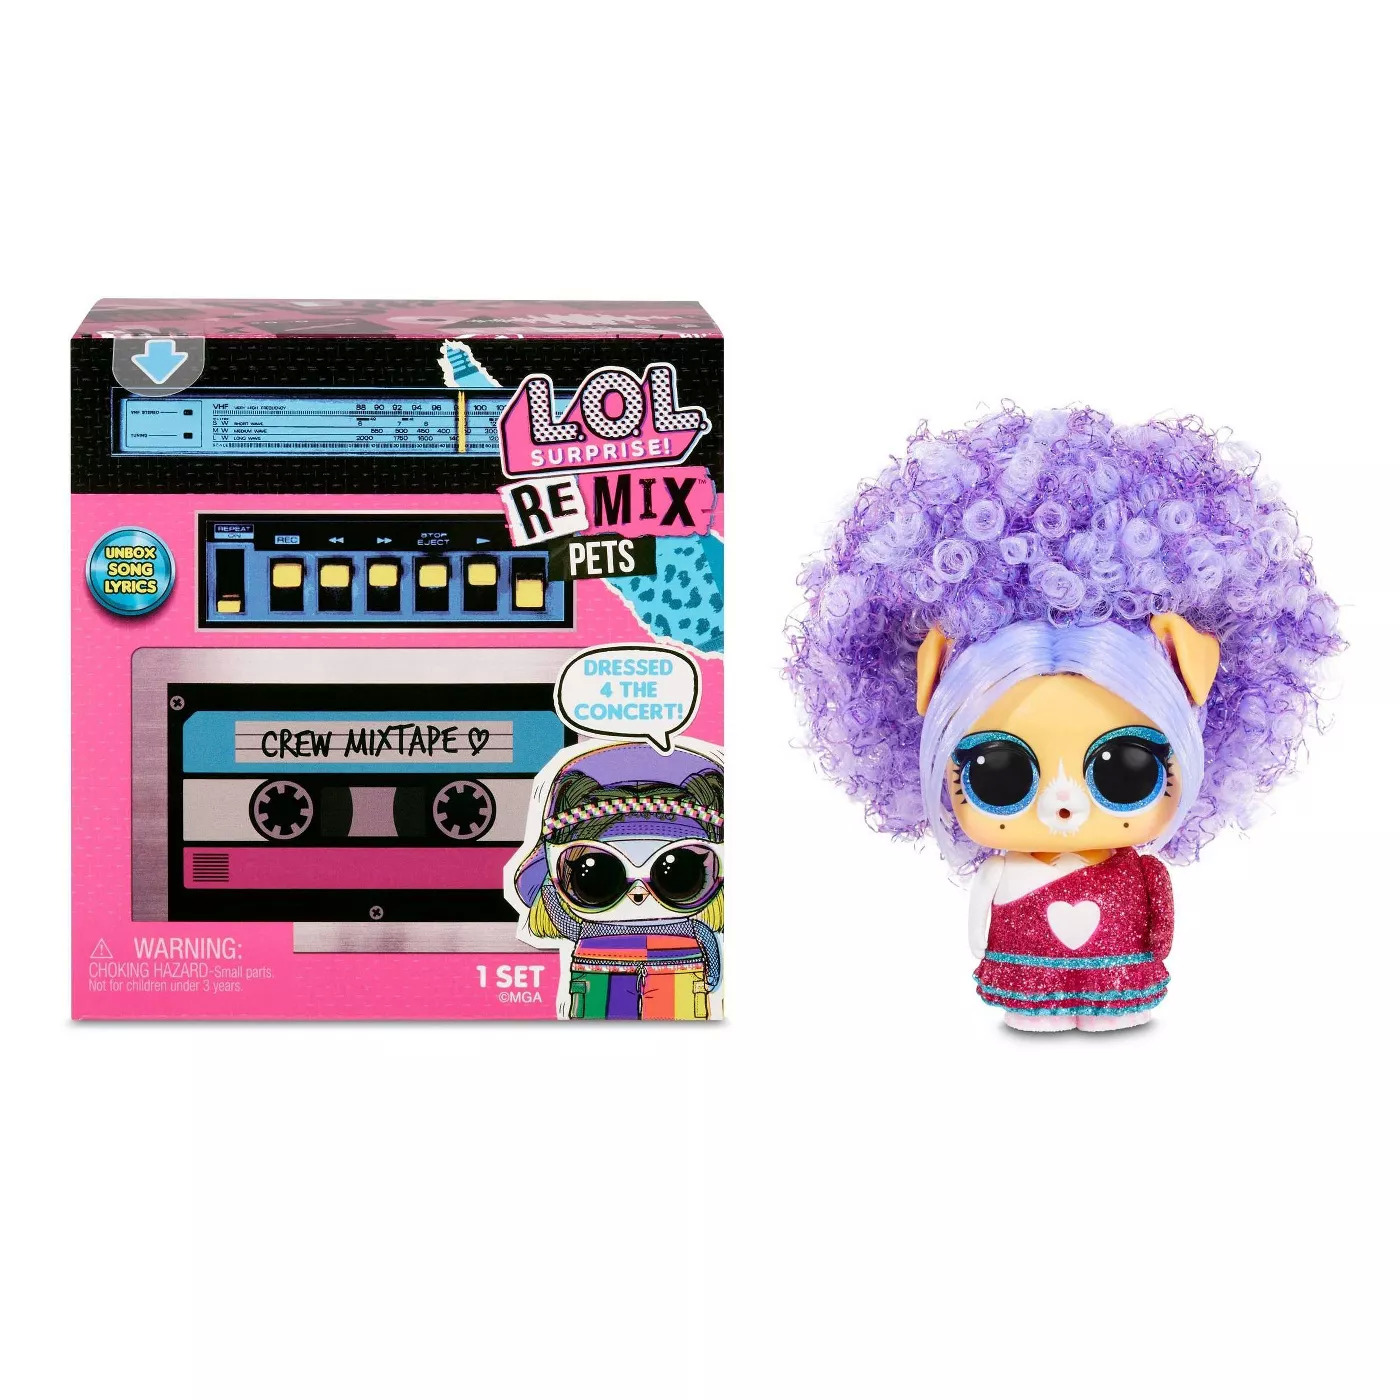 L.O.L. Surprise! Remix Pets w/ 9 Surprises with Real Hair & Surprise Song Lyrics $6.49 & More + Free Store Pickup at Target or FS on $35+